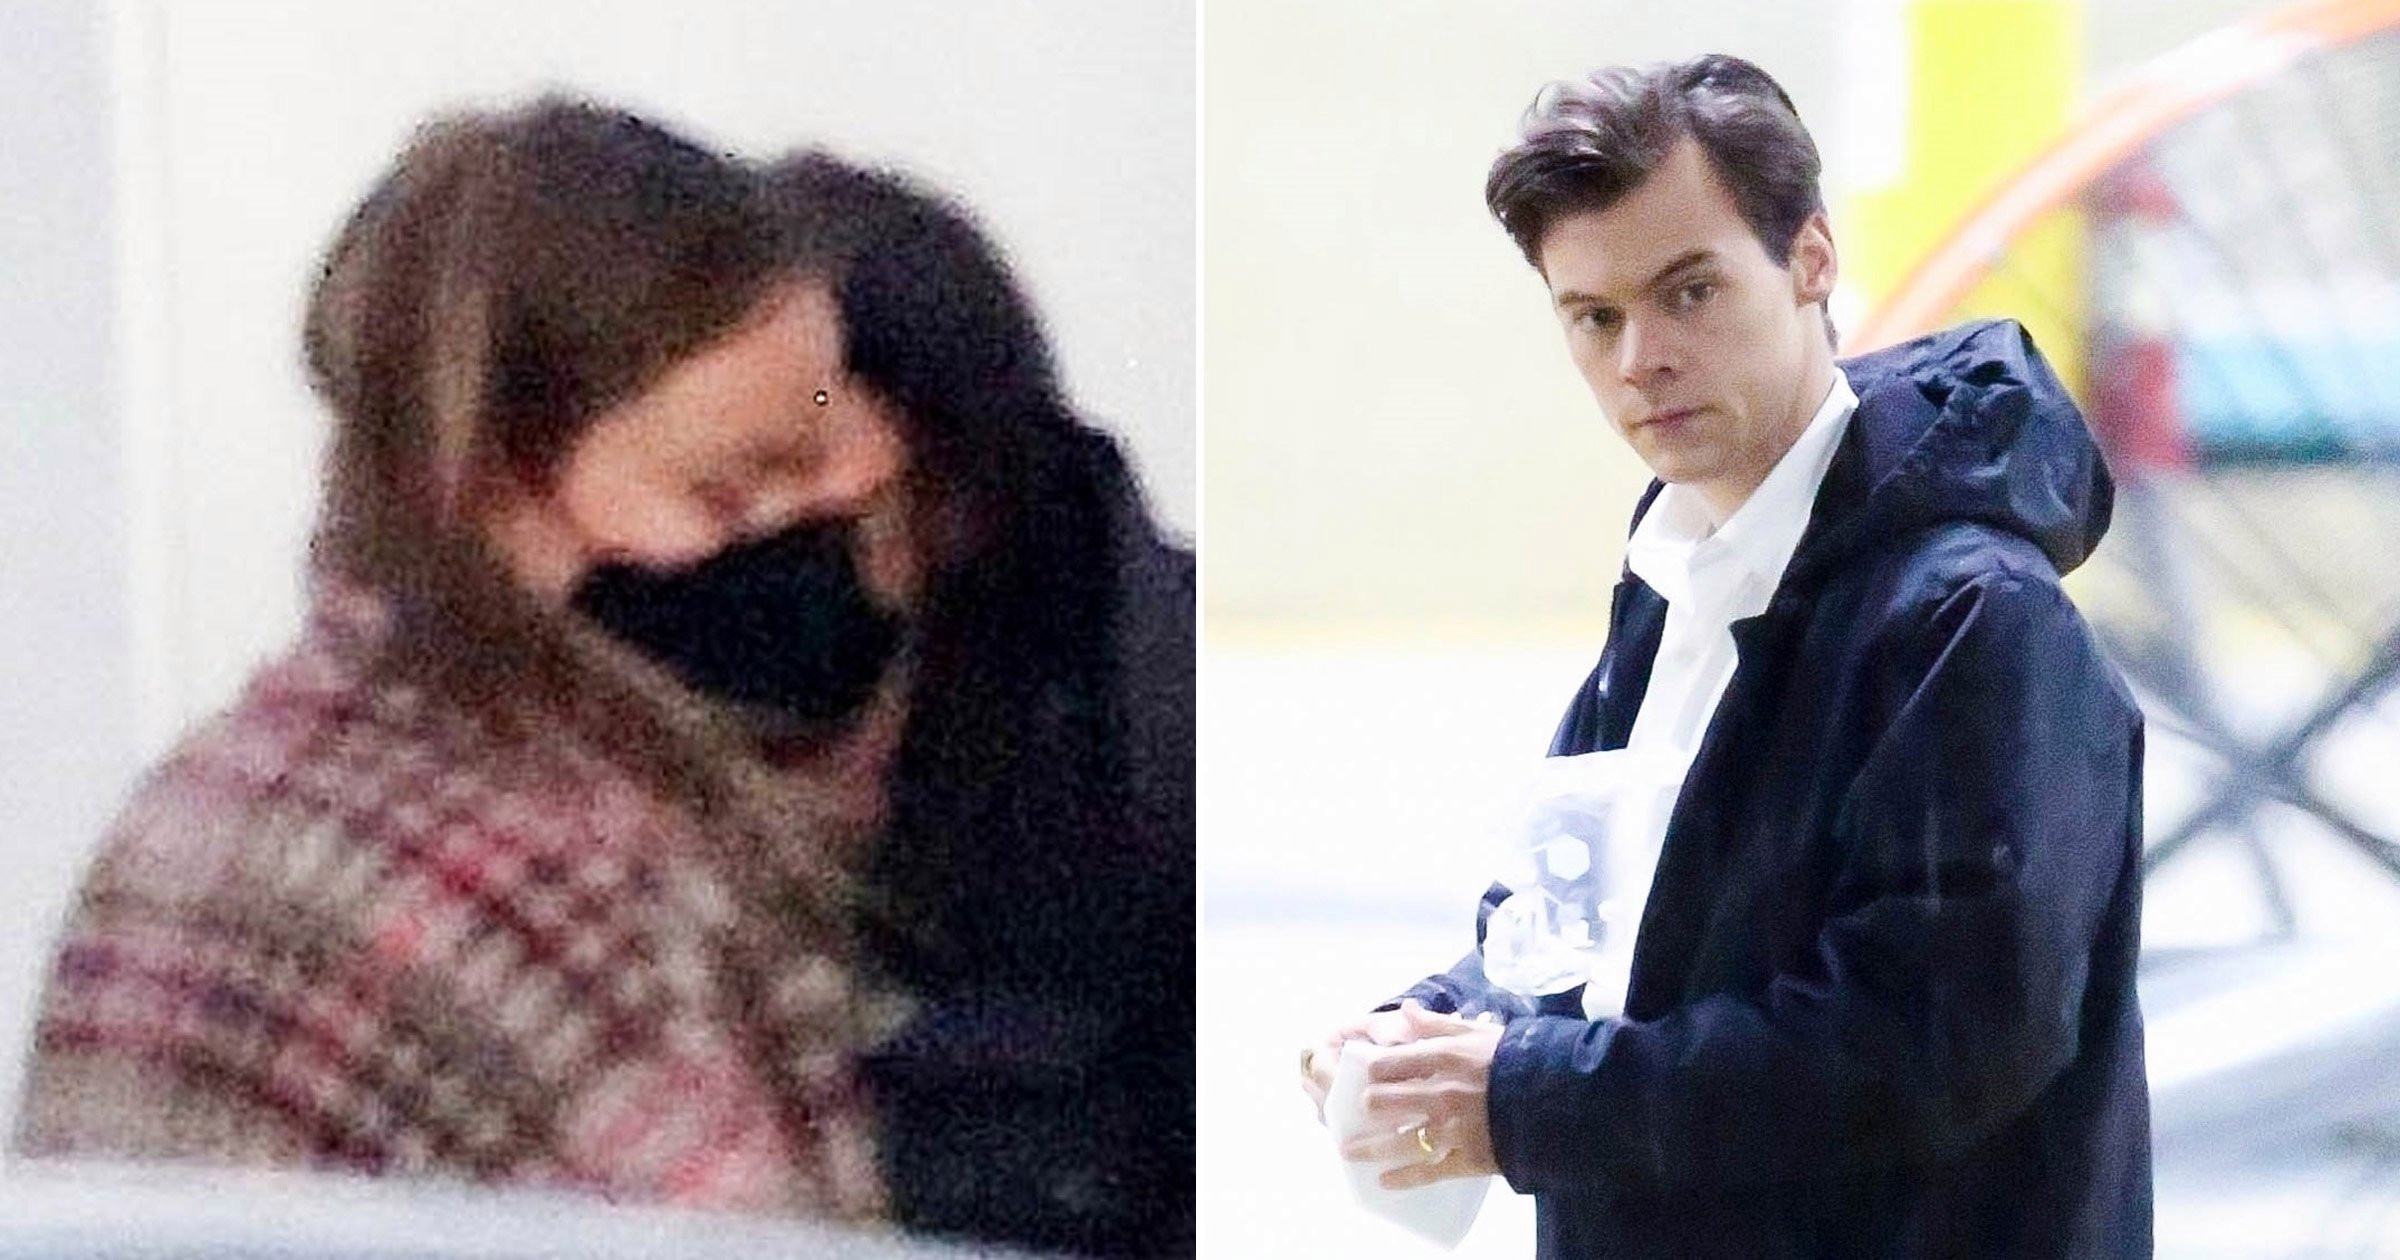 Harry Styles and Olivia Wilde maintain distance on set of Don’t Worry Darling as filming continues